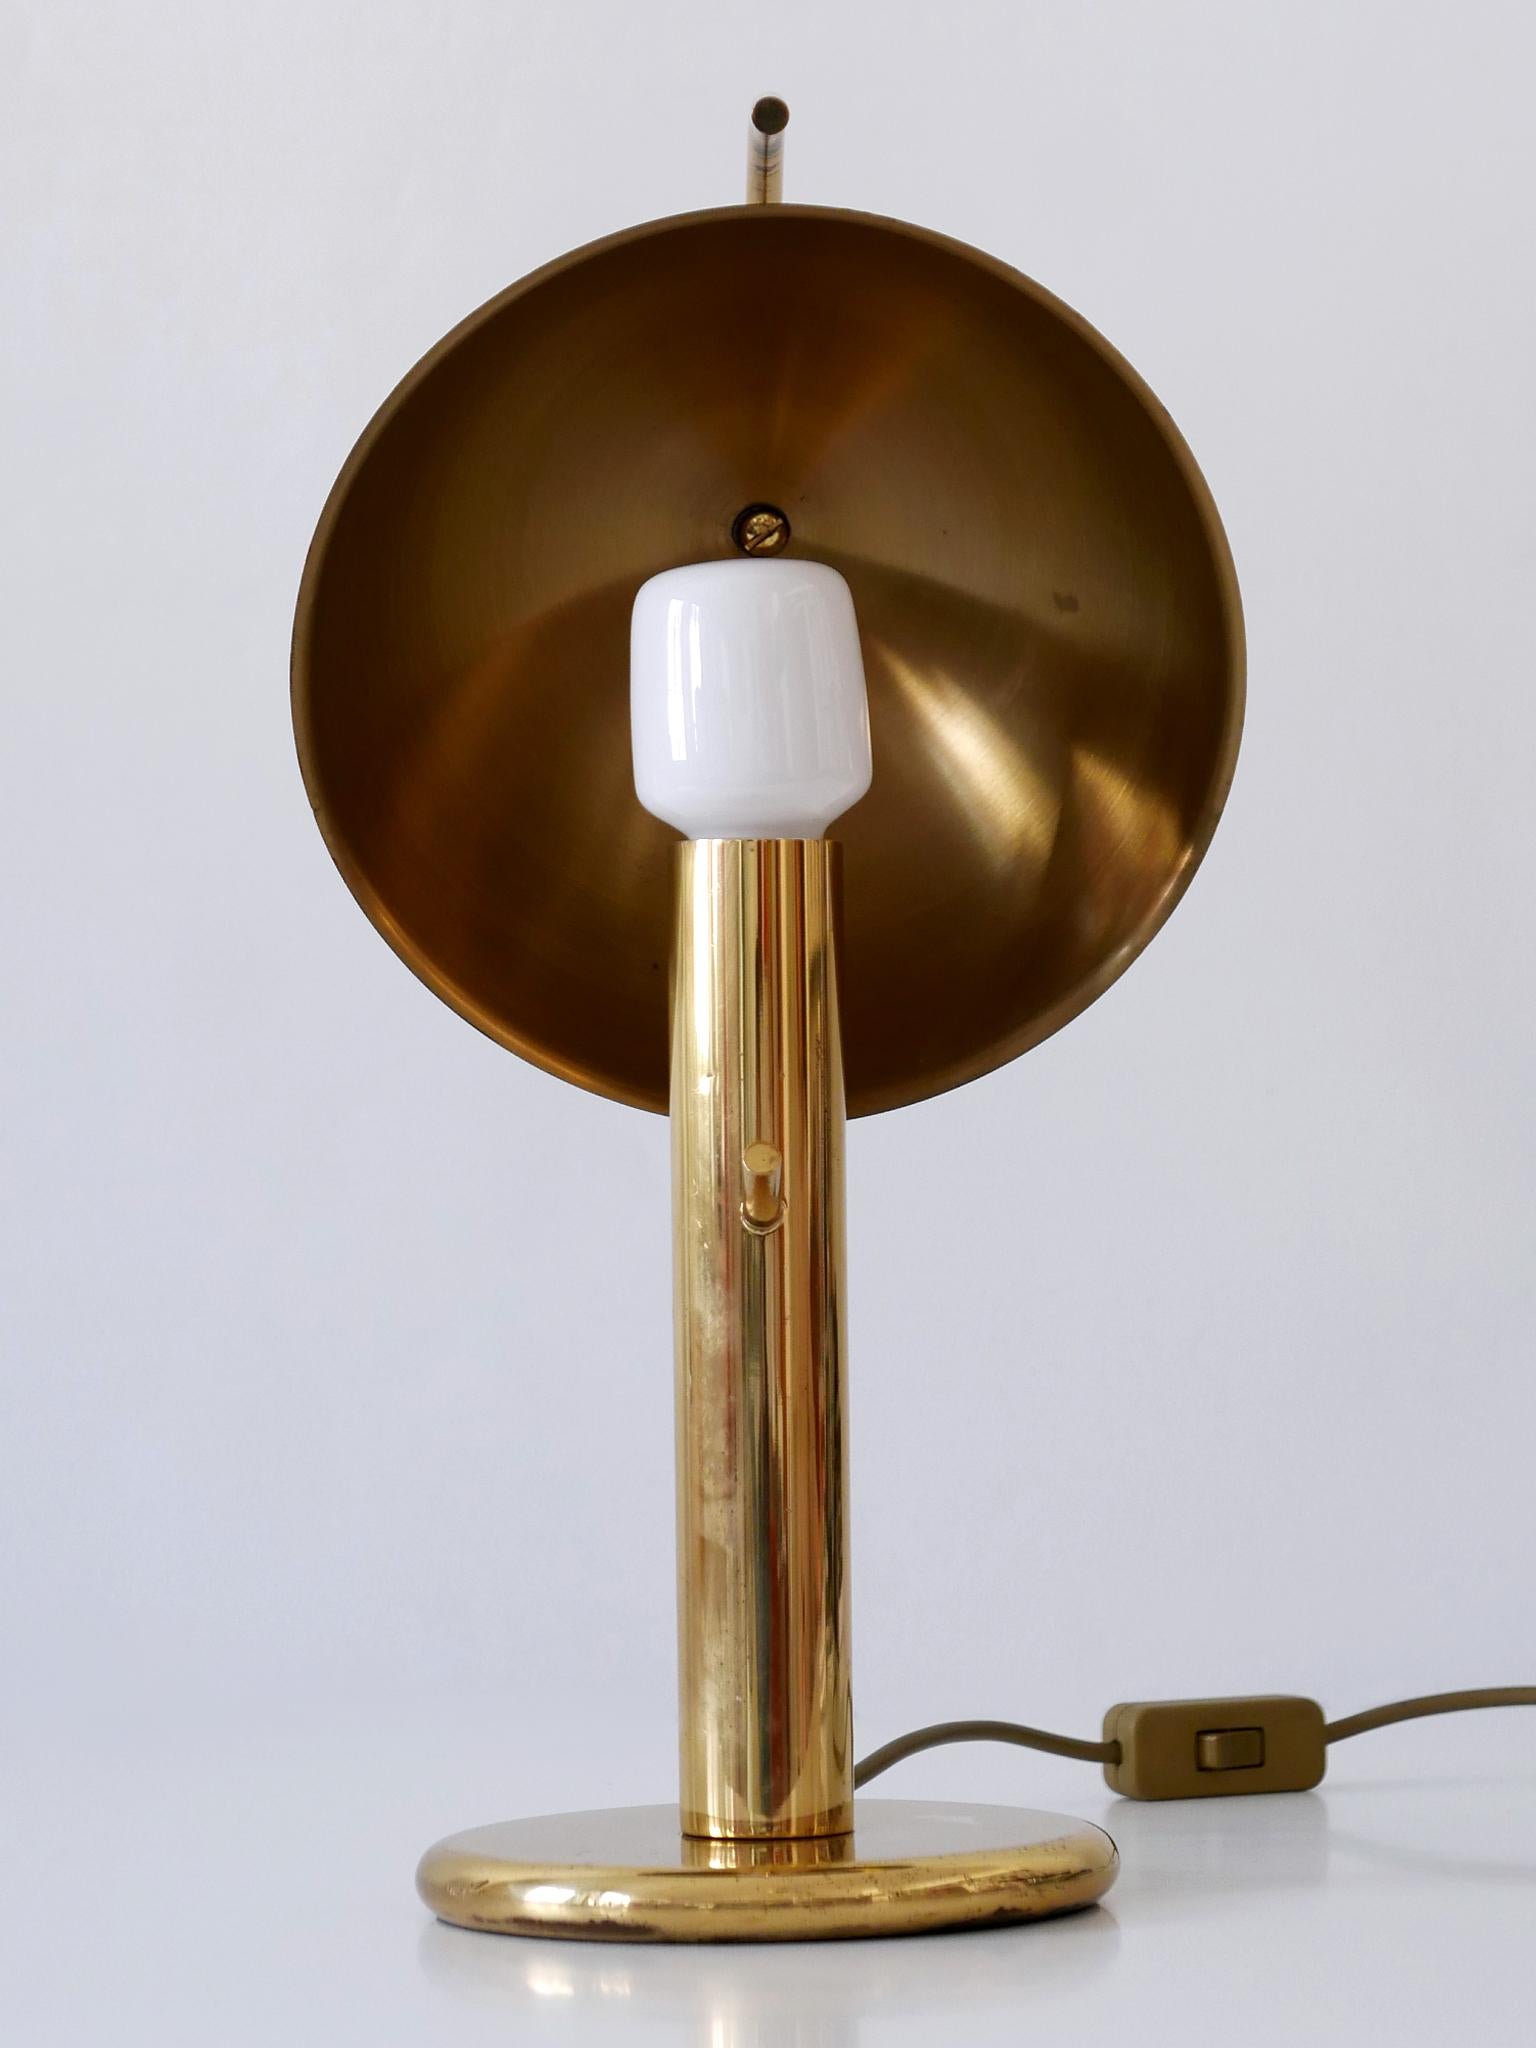 Exceptional Mid-Century Modern Brass Table Lamp by Gebrüder Cosack Germany 1960s For Sale 11